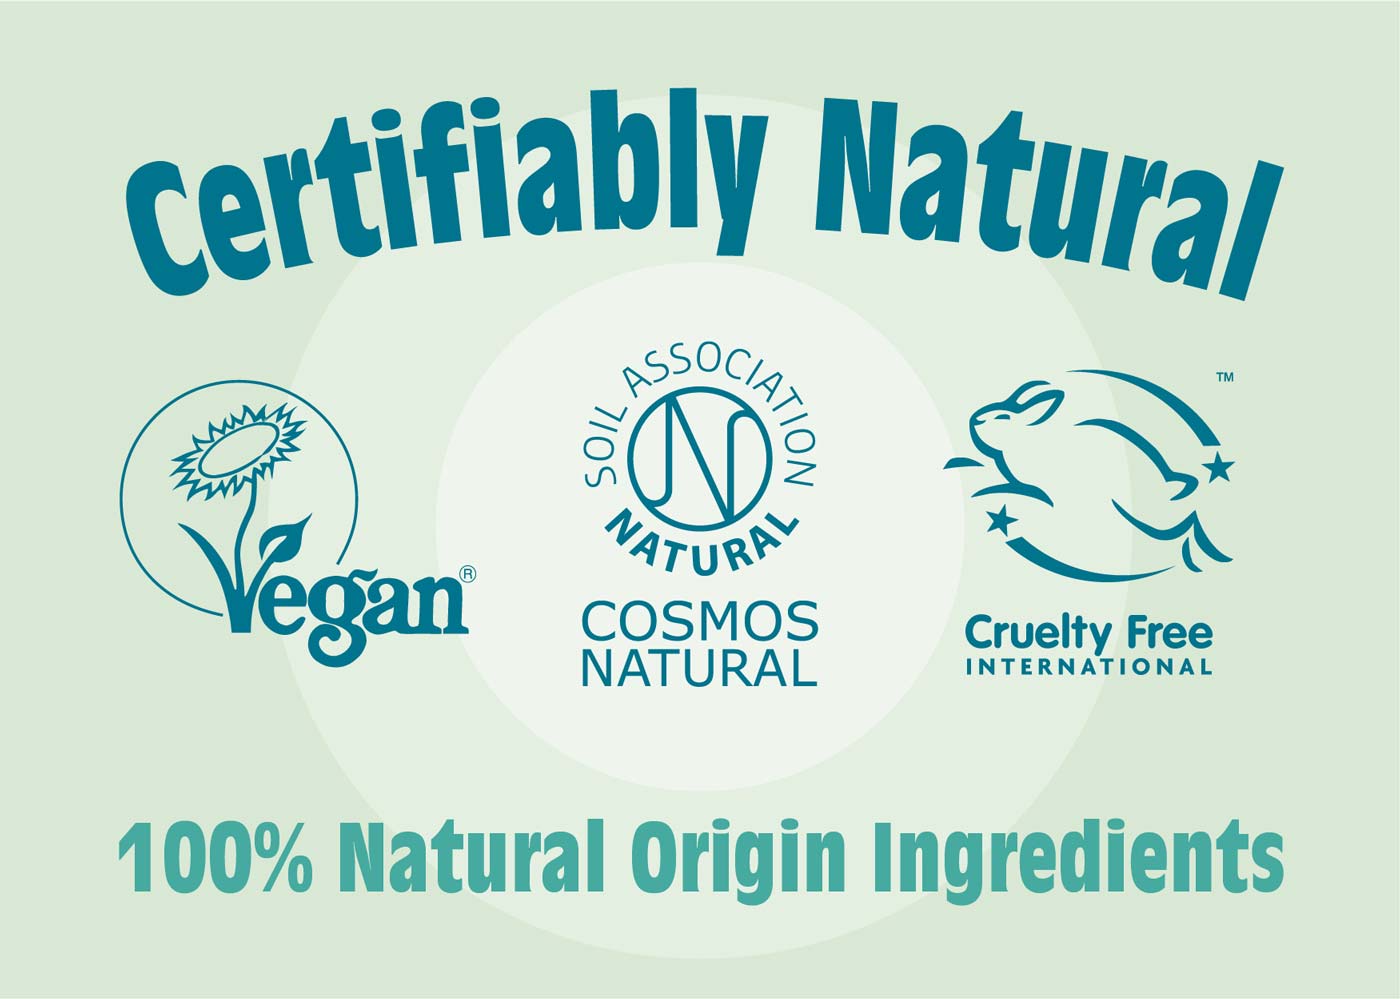 certifiably-natural-4.jpg